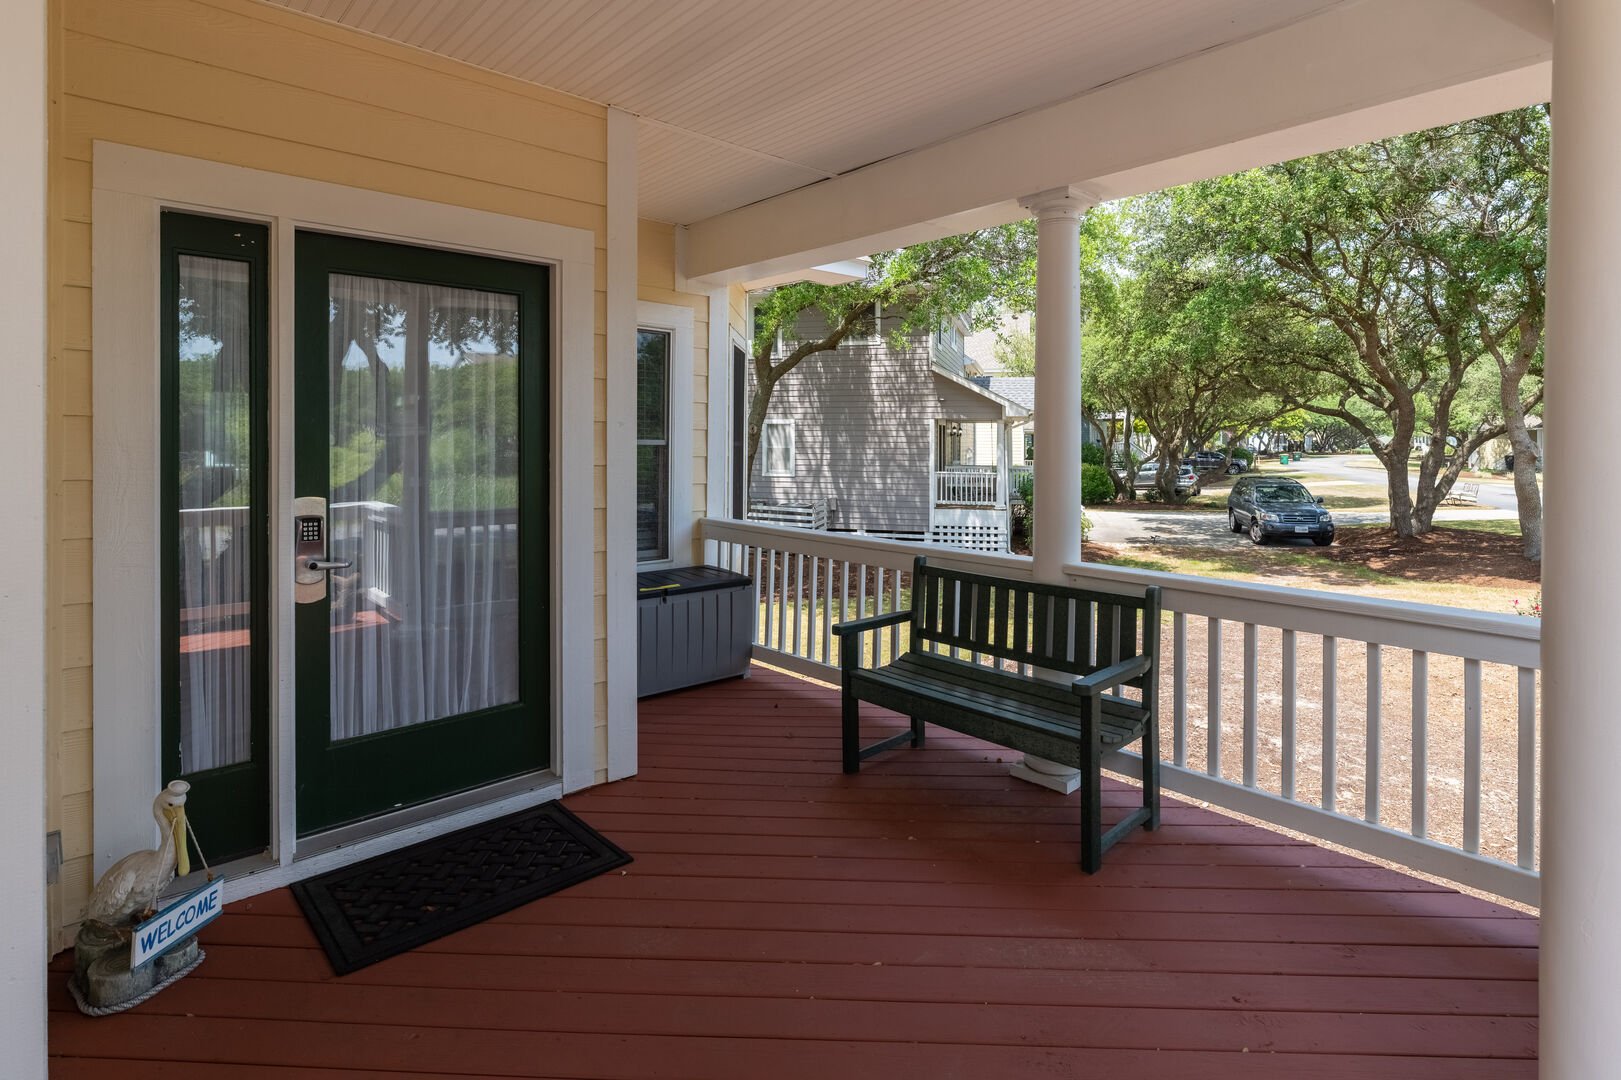 Front Porch - Entry Level